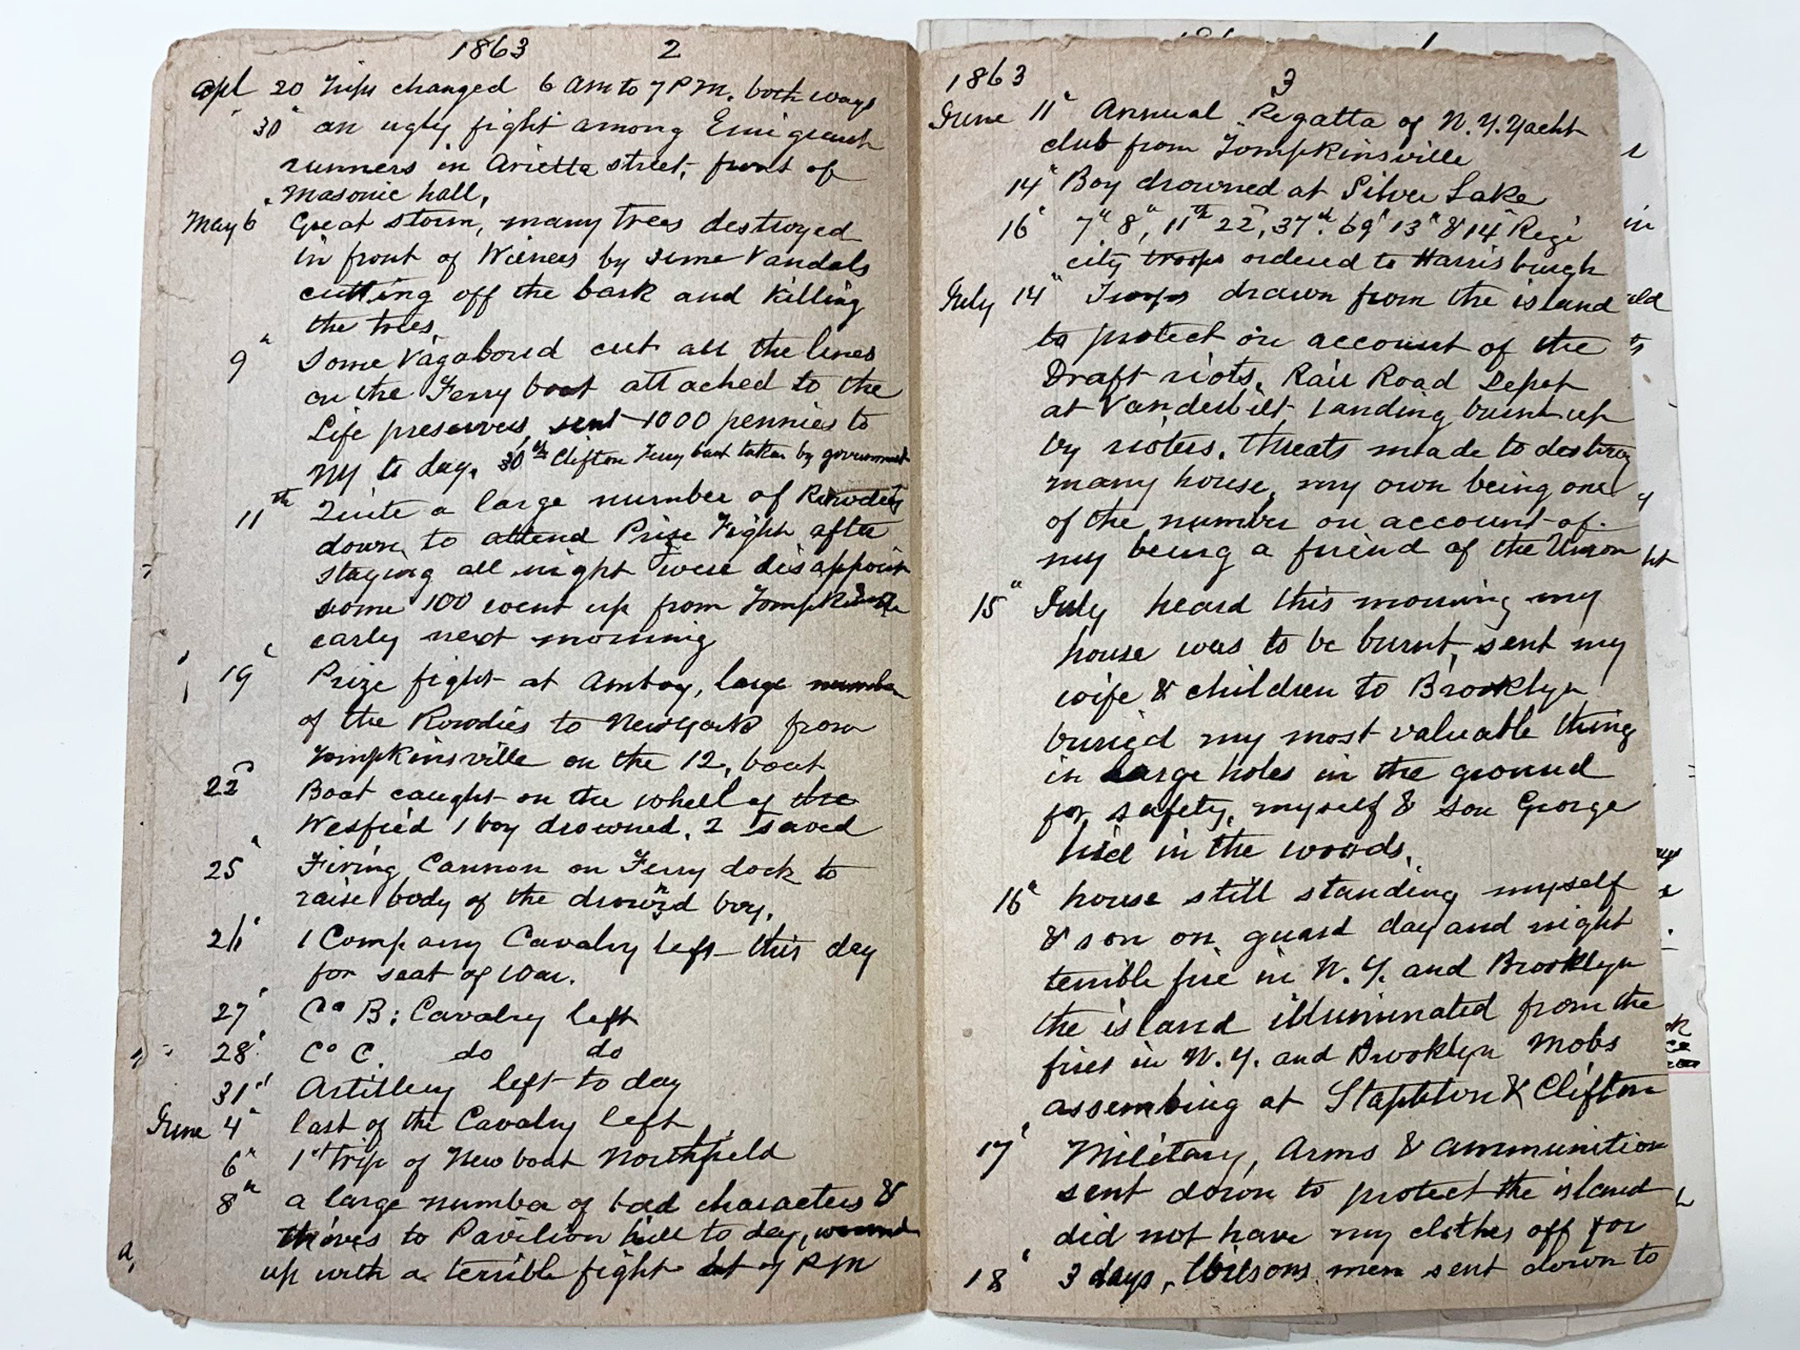 A photograph of an open diary, white pages with black handwriting in script.